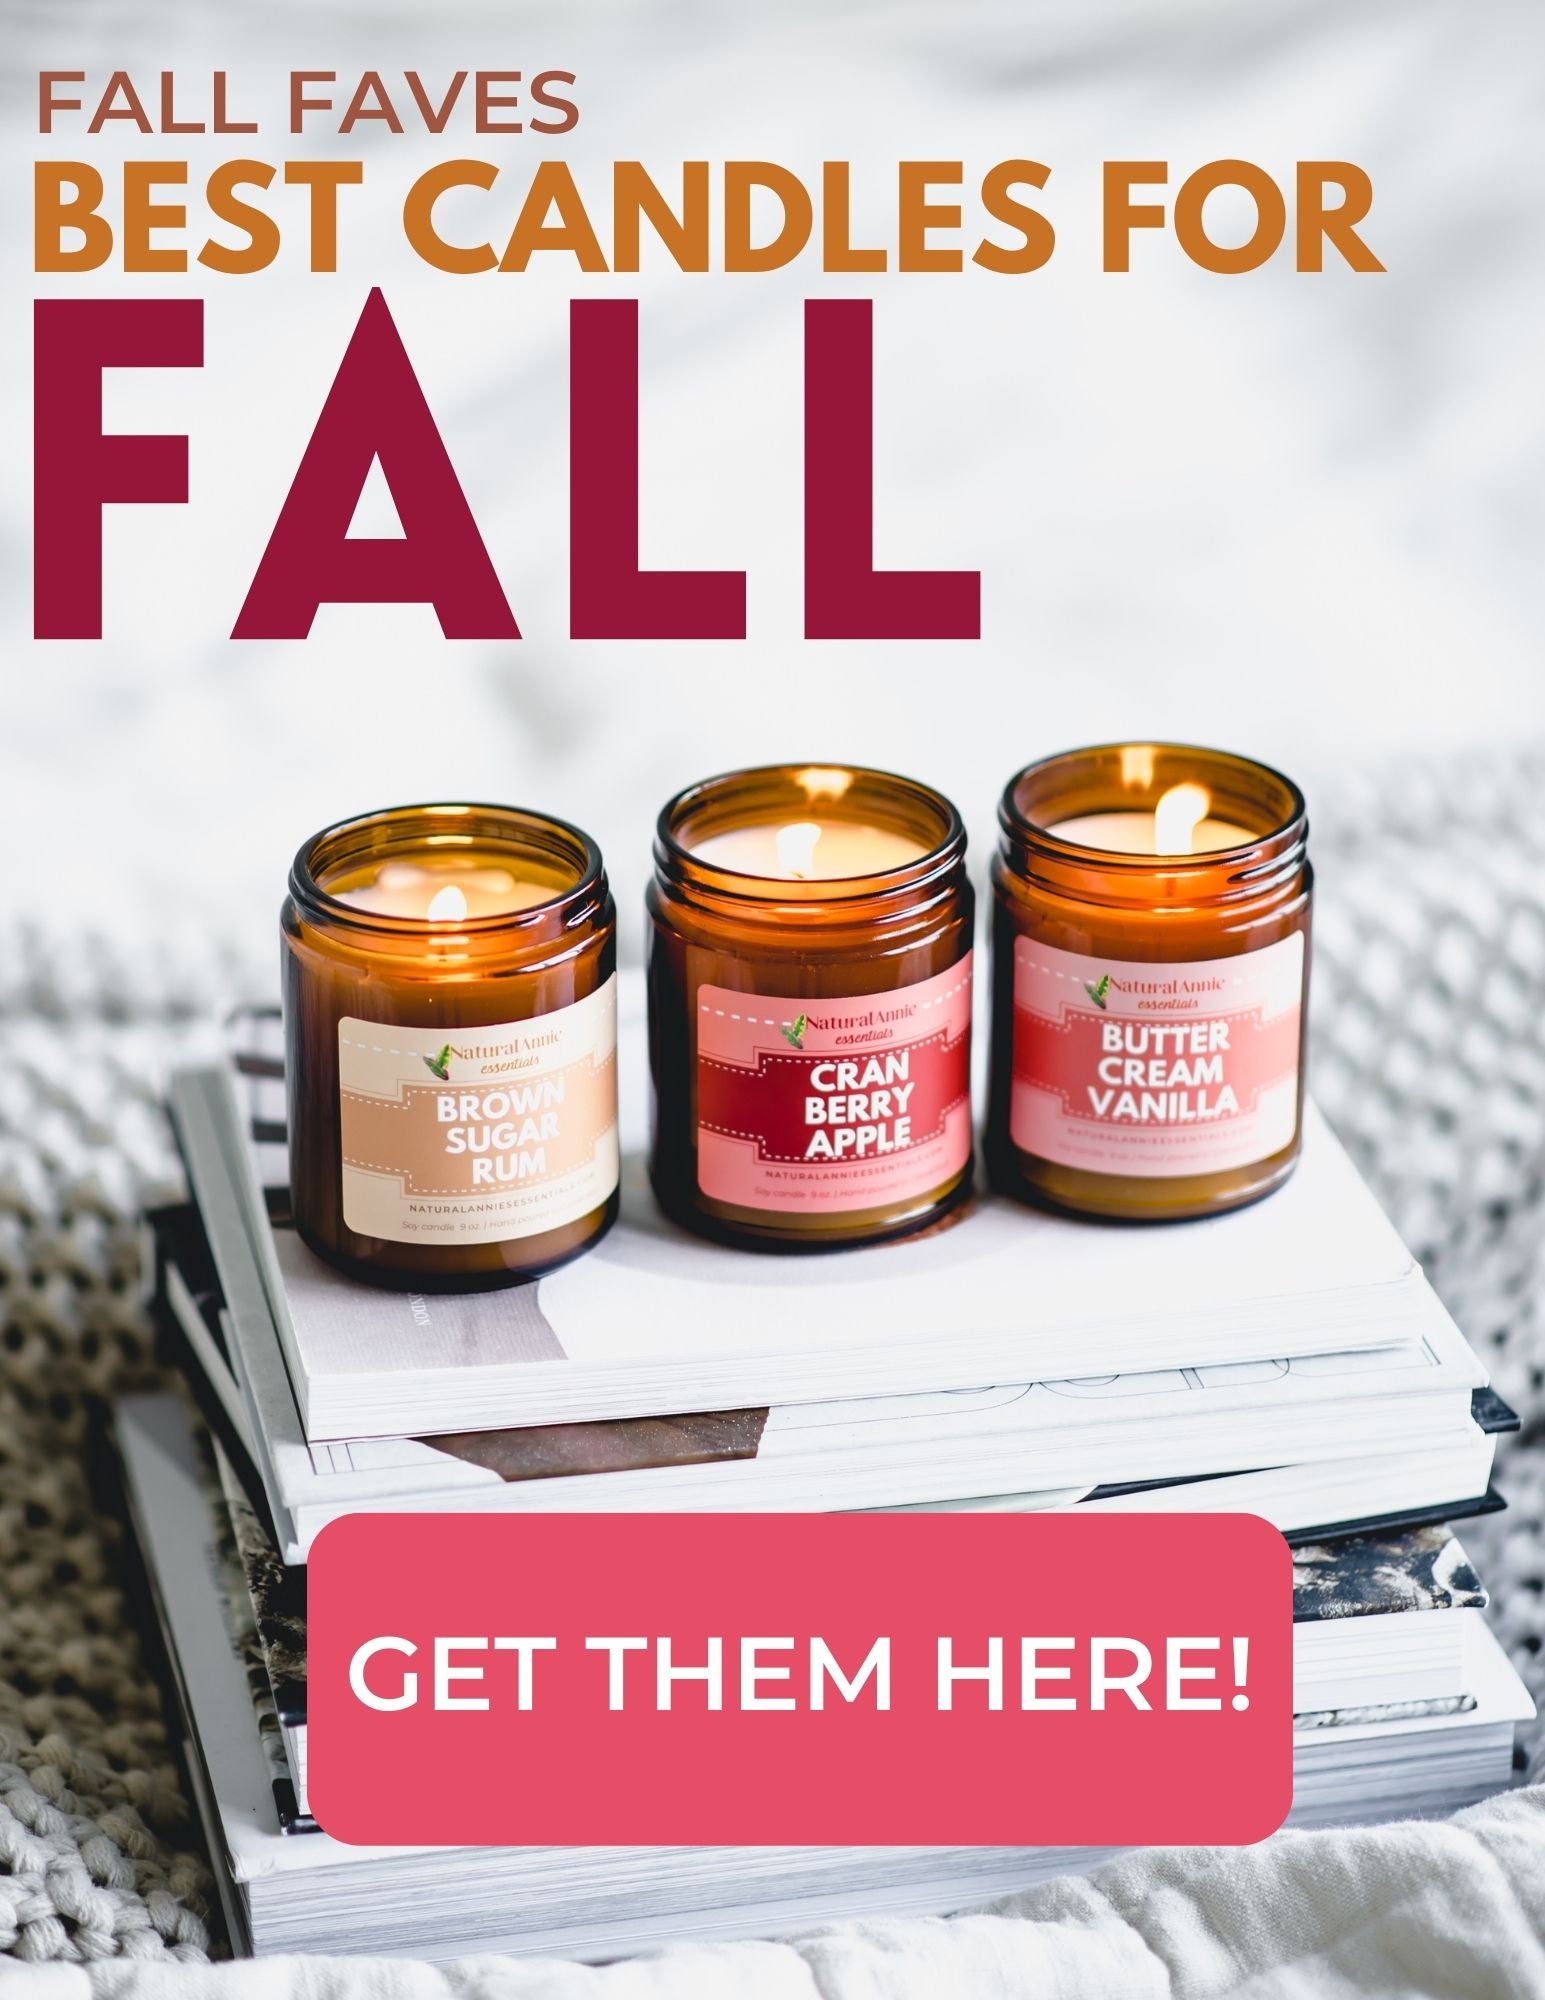 BEST ALL NATURAL CANDLES FOR FALL